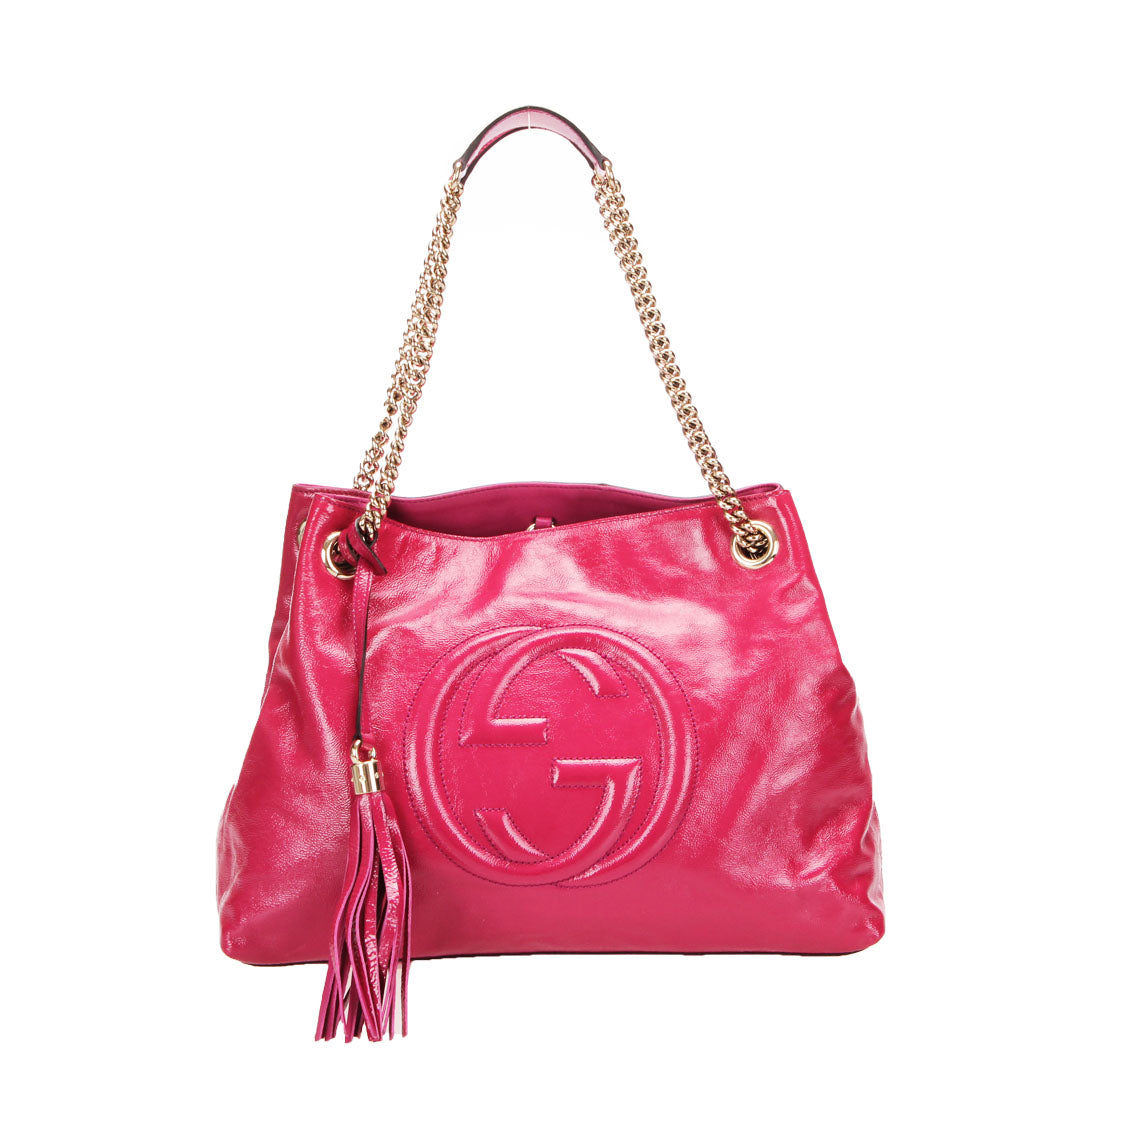 Soho Patent Leather Chain Shoulder Bag